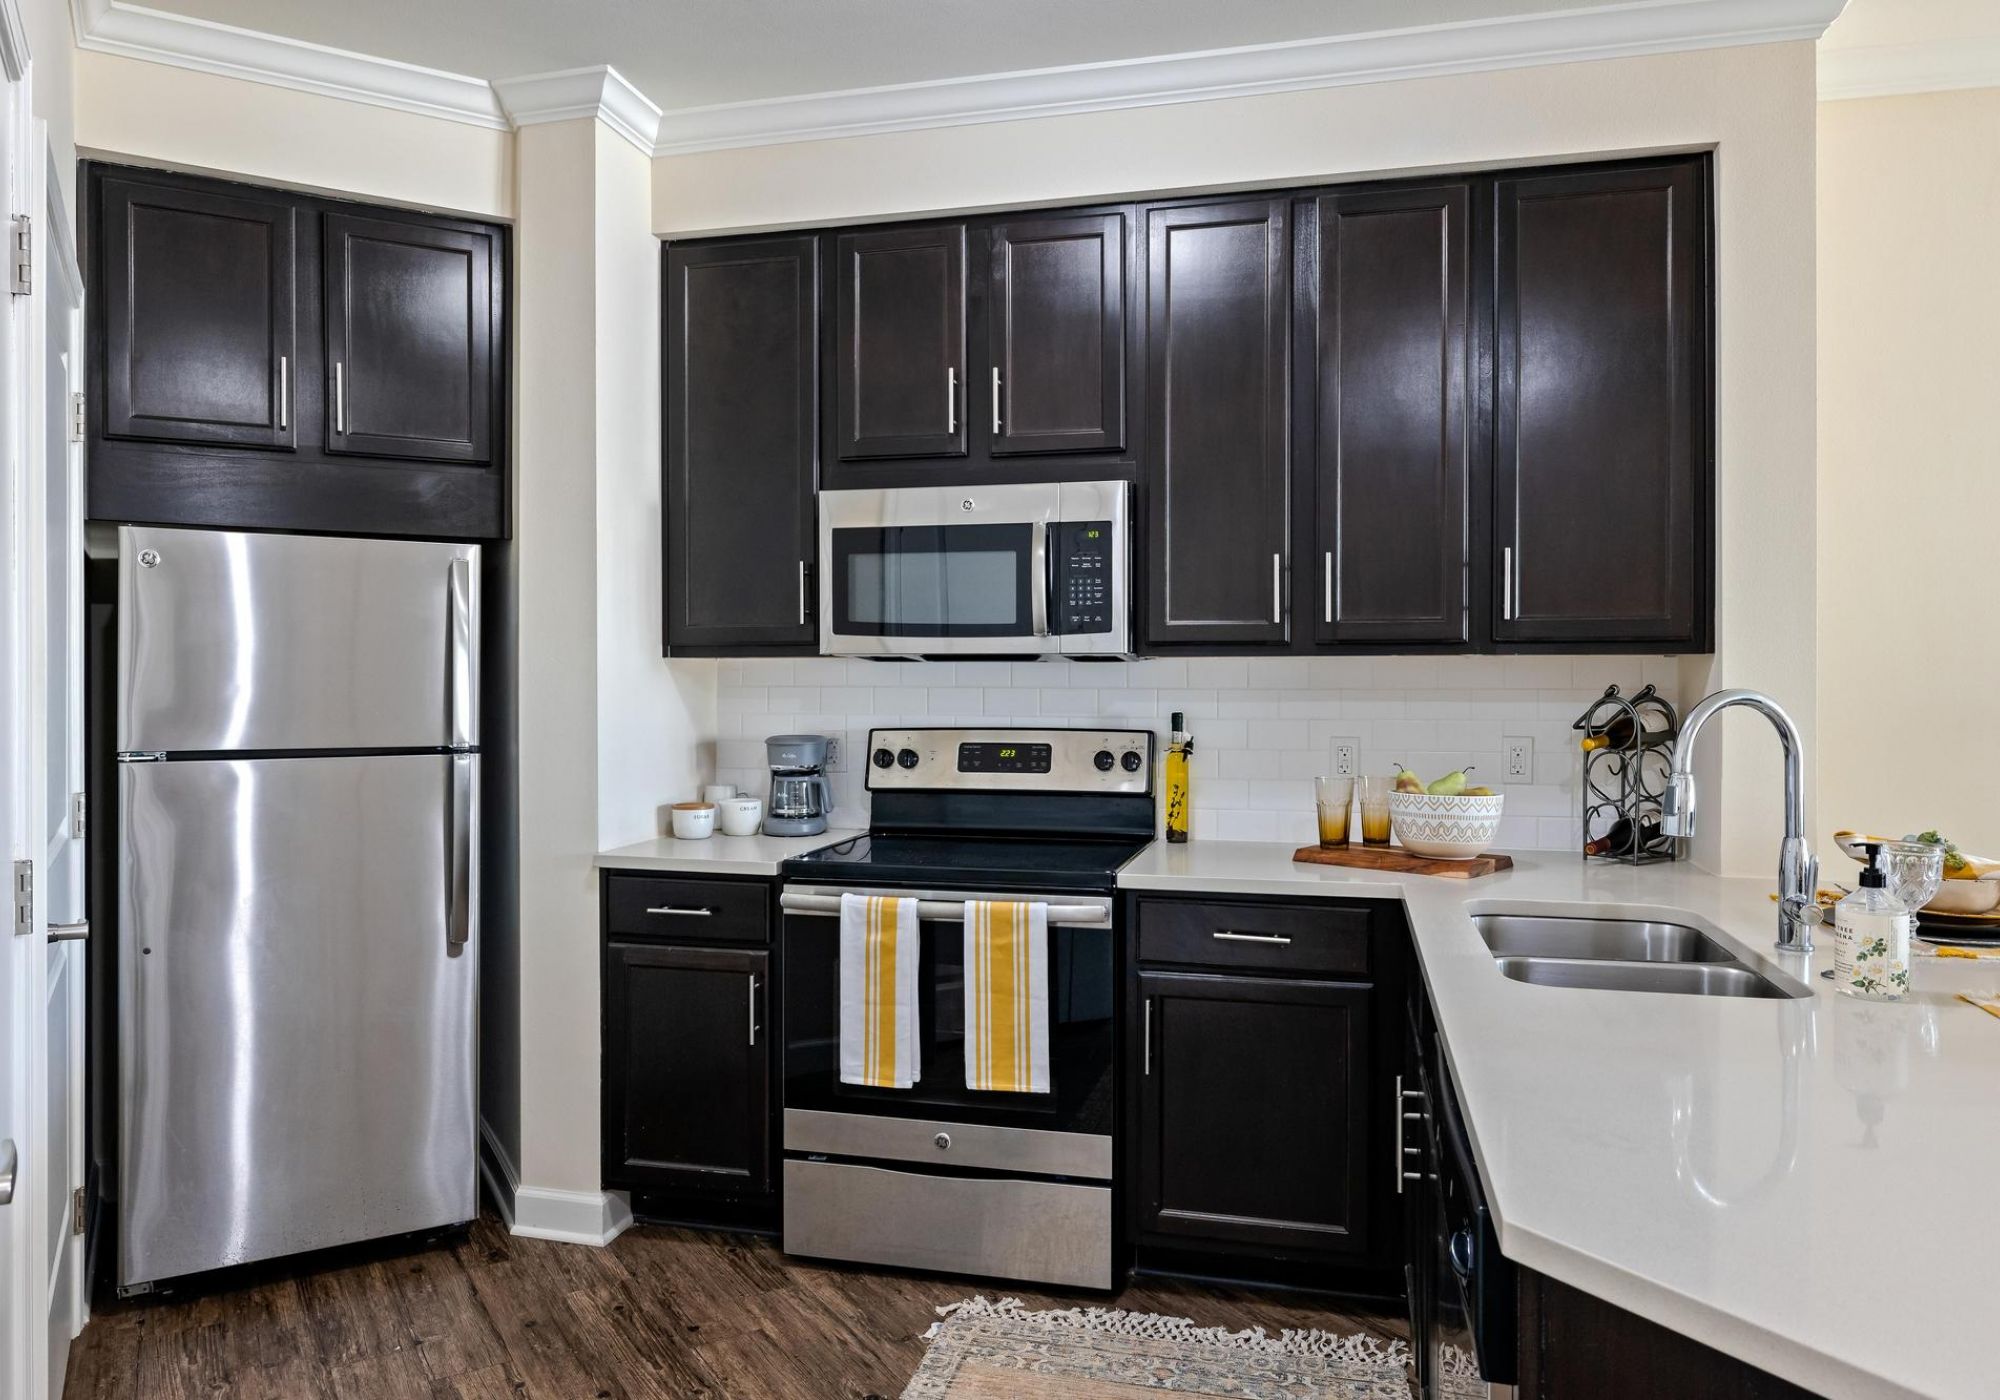 The Claiborne at Baton Rouge senior living community full kitchen with high-end finishes